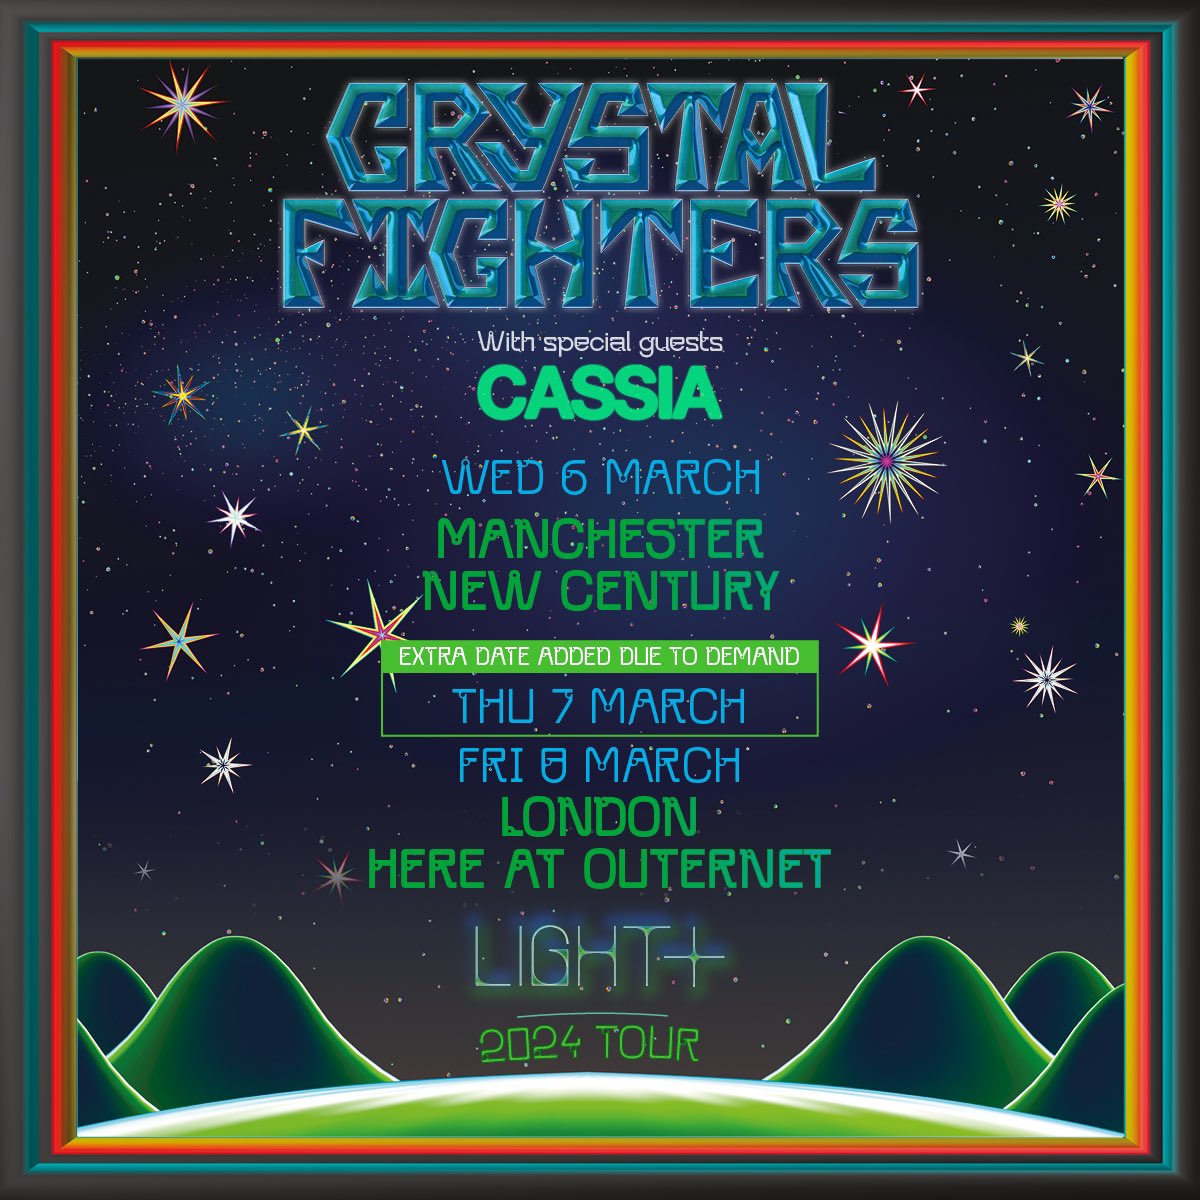 Psyched to be joining our mates @crystalfighters on their Manchester & London dates! Who’s coming down?✌️